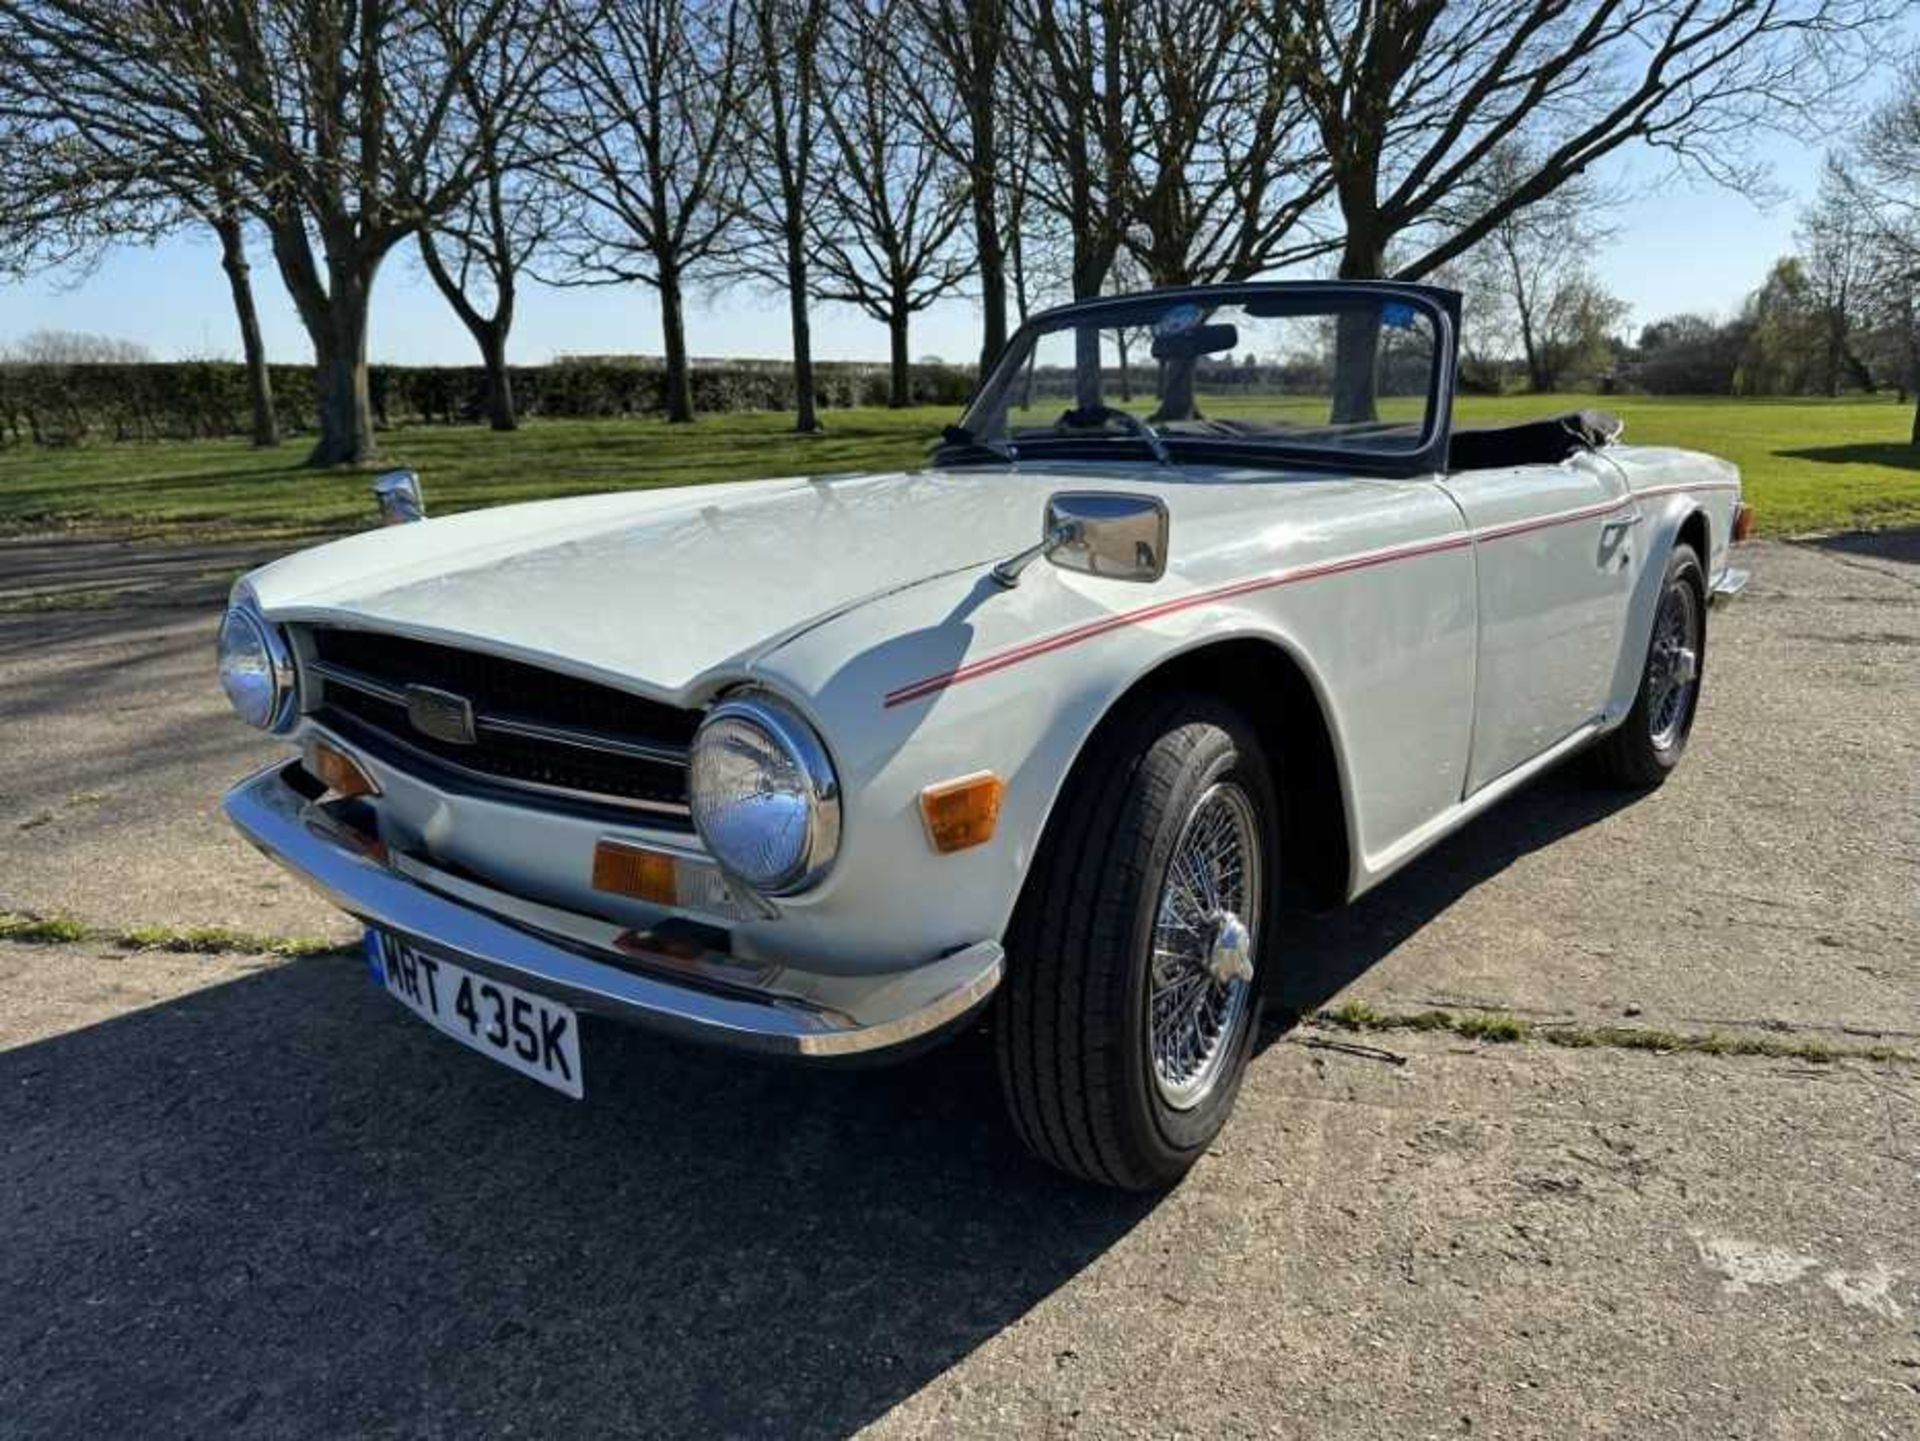 1972 Triumph TR6, 2498cc, manual, chassis number CP542320, reg. no. MRT 435K - Image 3 of 29